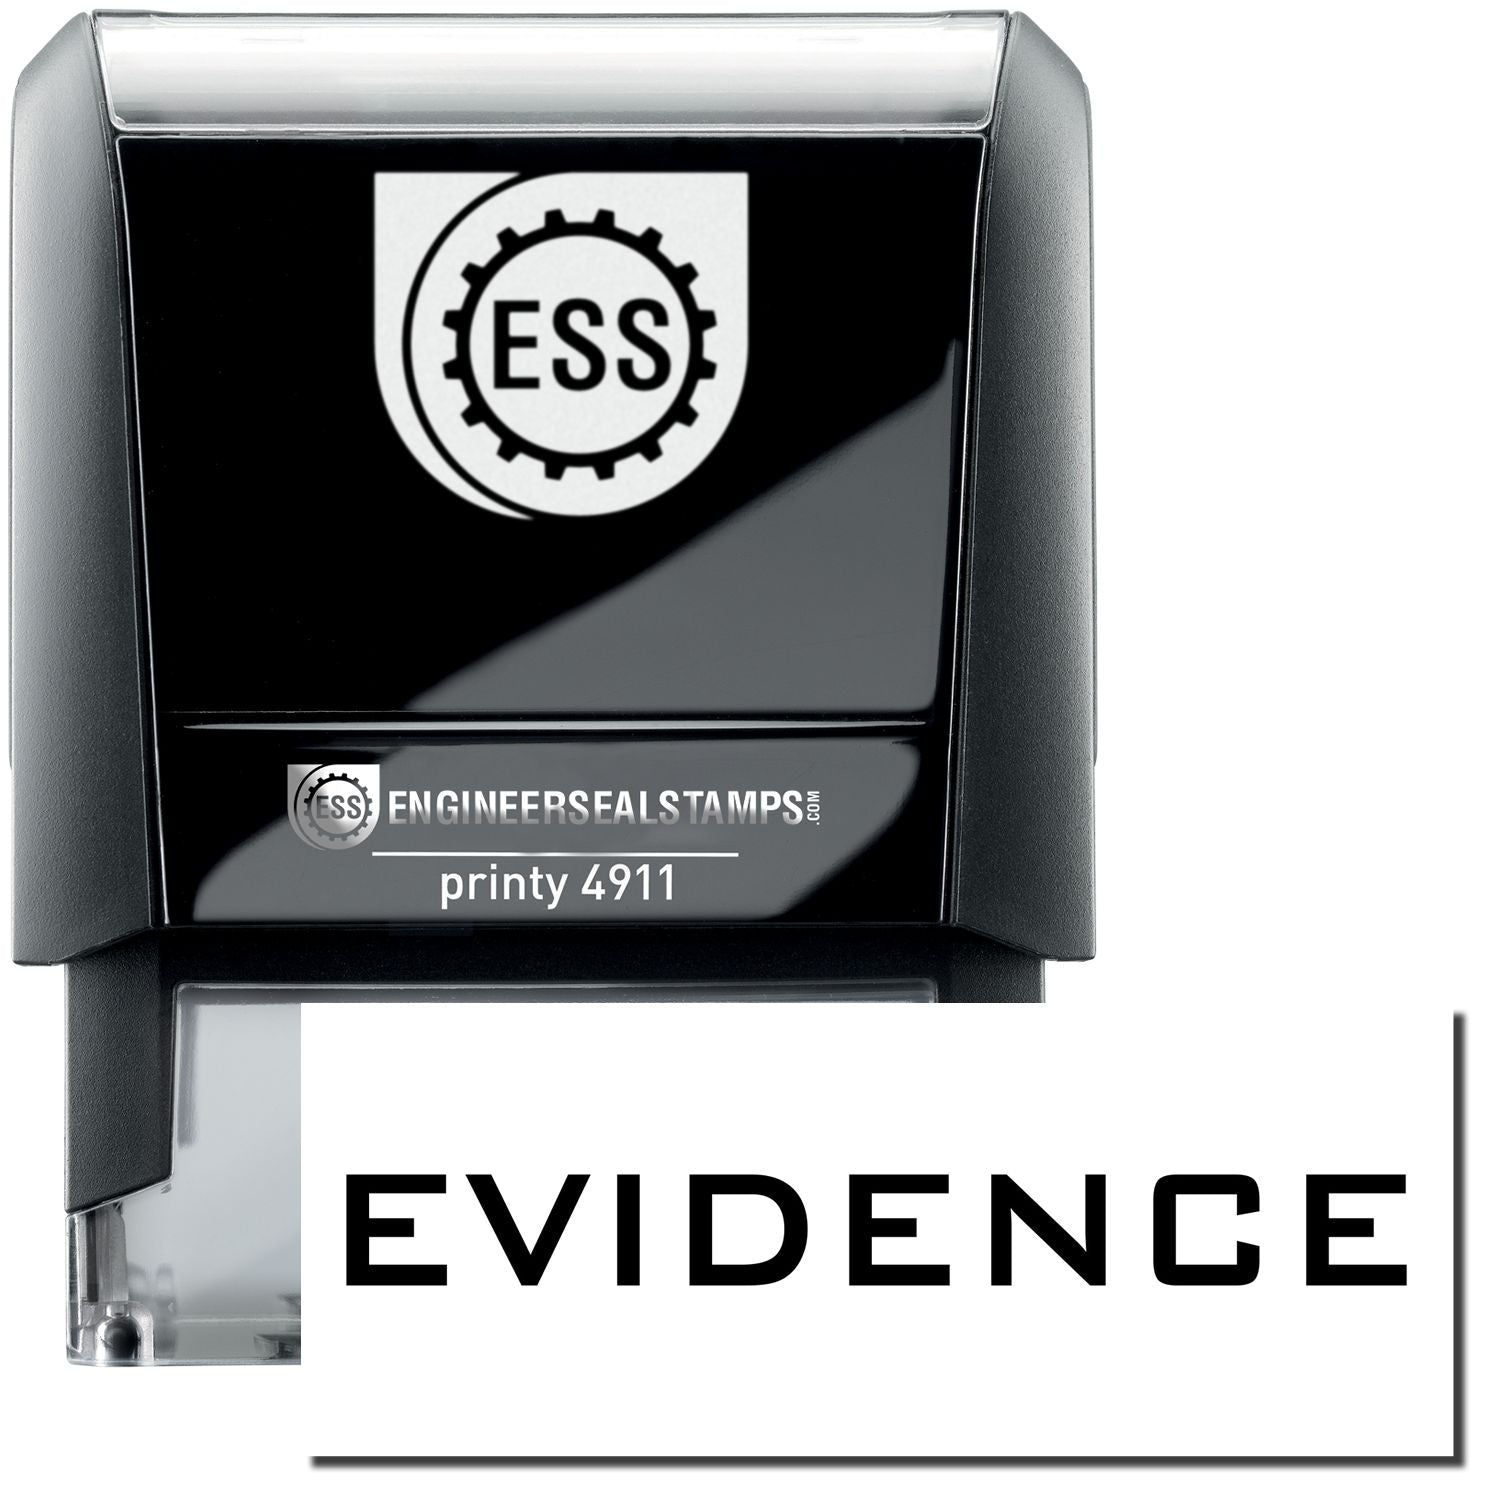 A self-inking stamp with a stamped image showing how the text "EVIDENCE" is displayed after stamping.